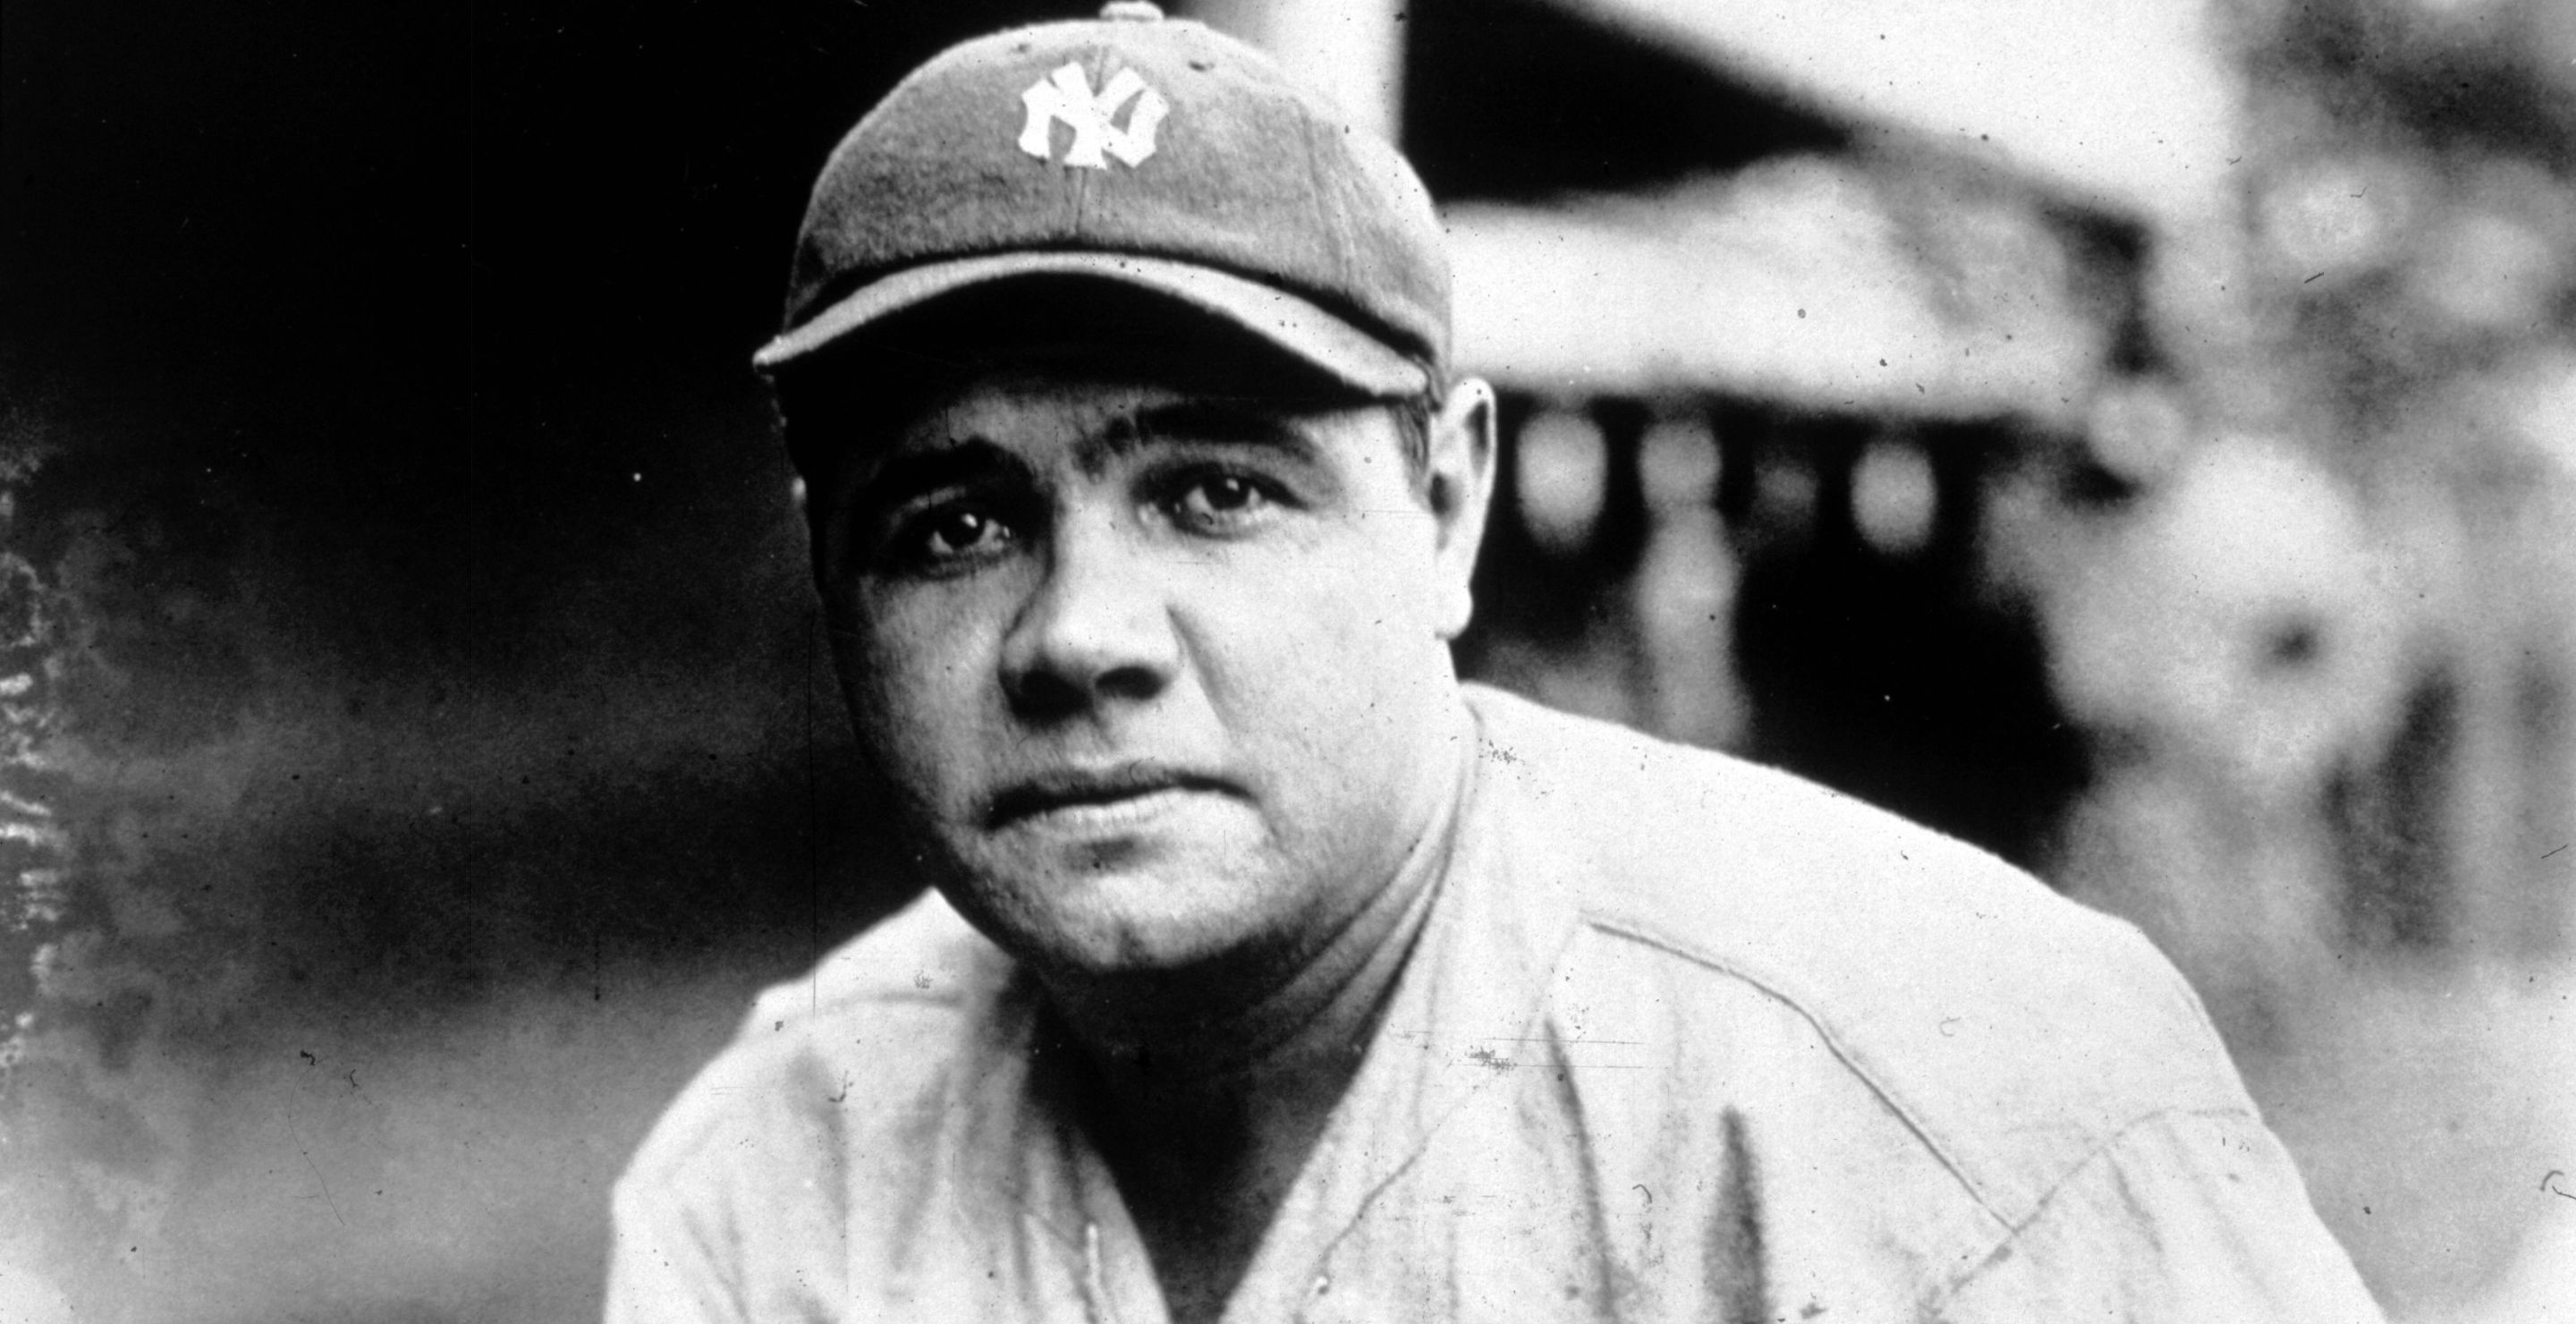 Nicknames on Yankees' Backs? What Would the Bambino Think? - The